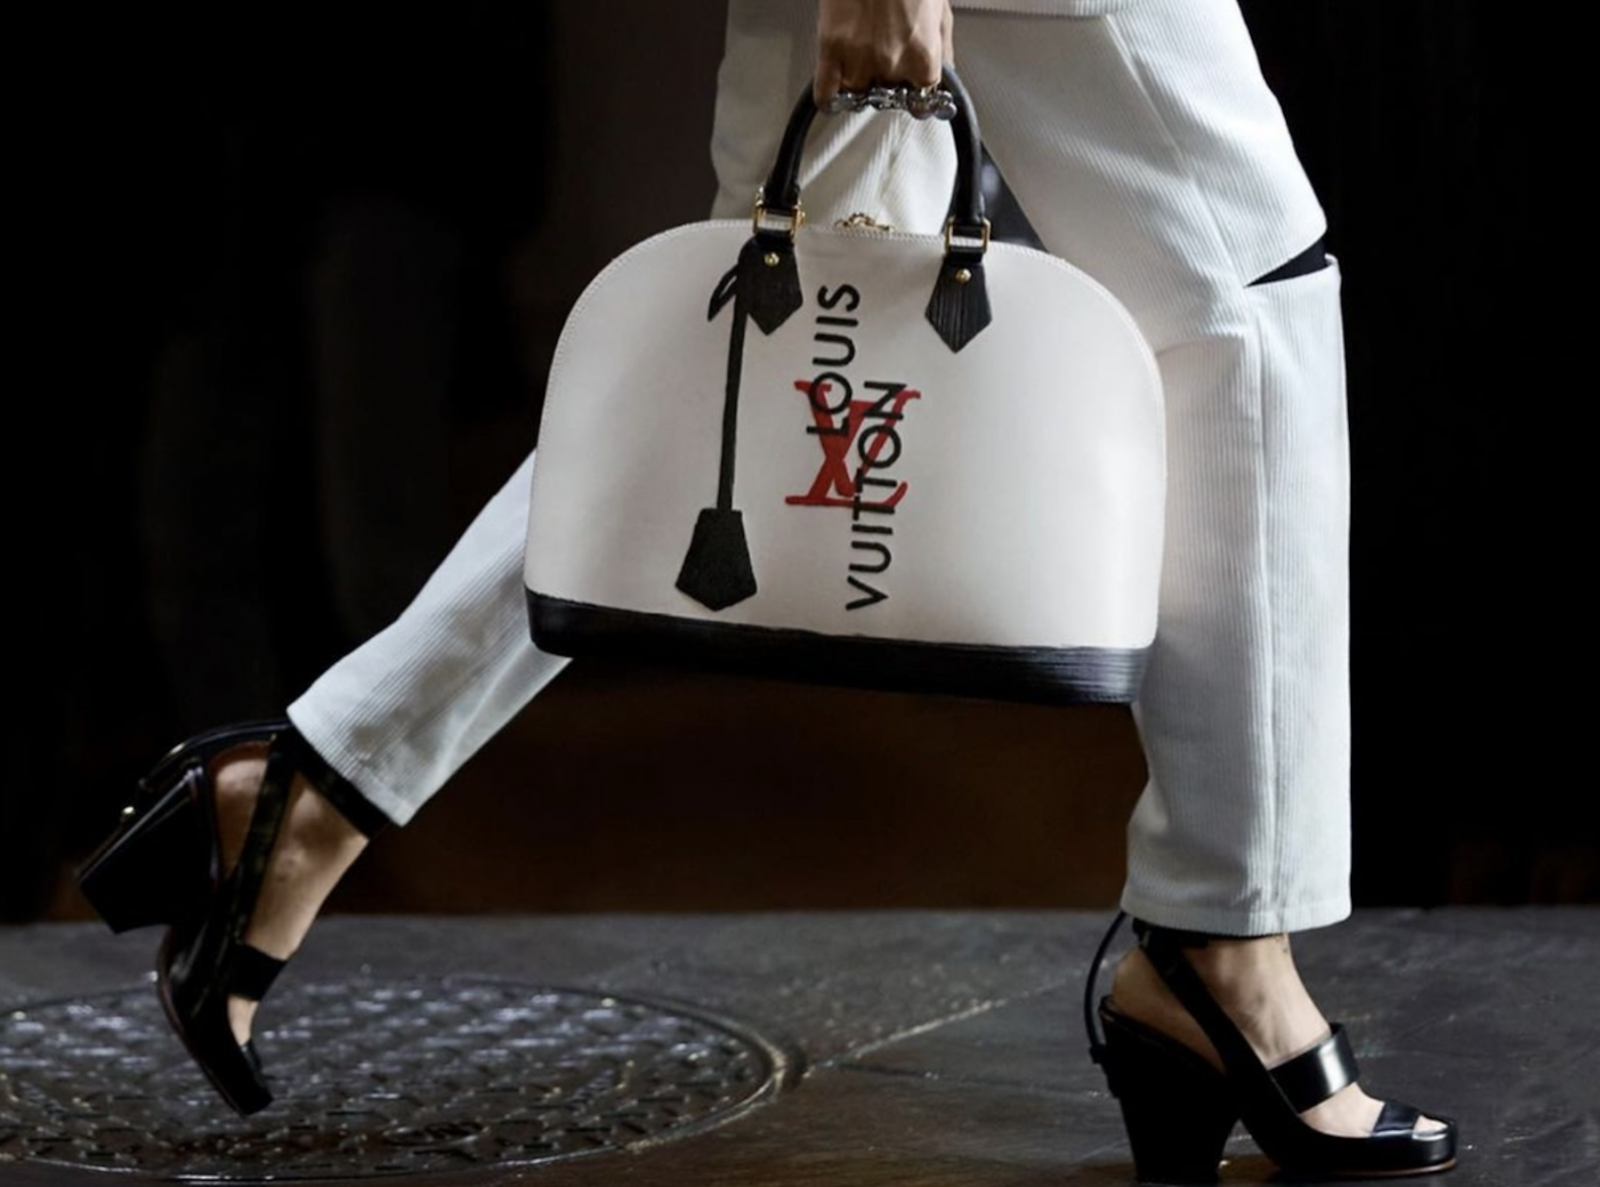 A New Louis Vuitton Lawsuit Shows its Strategic Approach to Brand